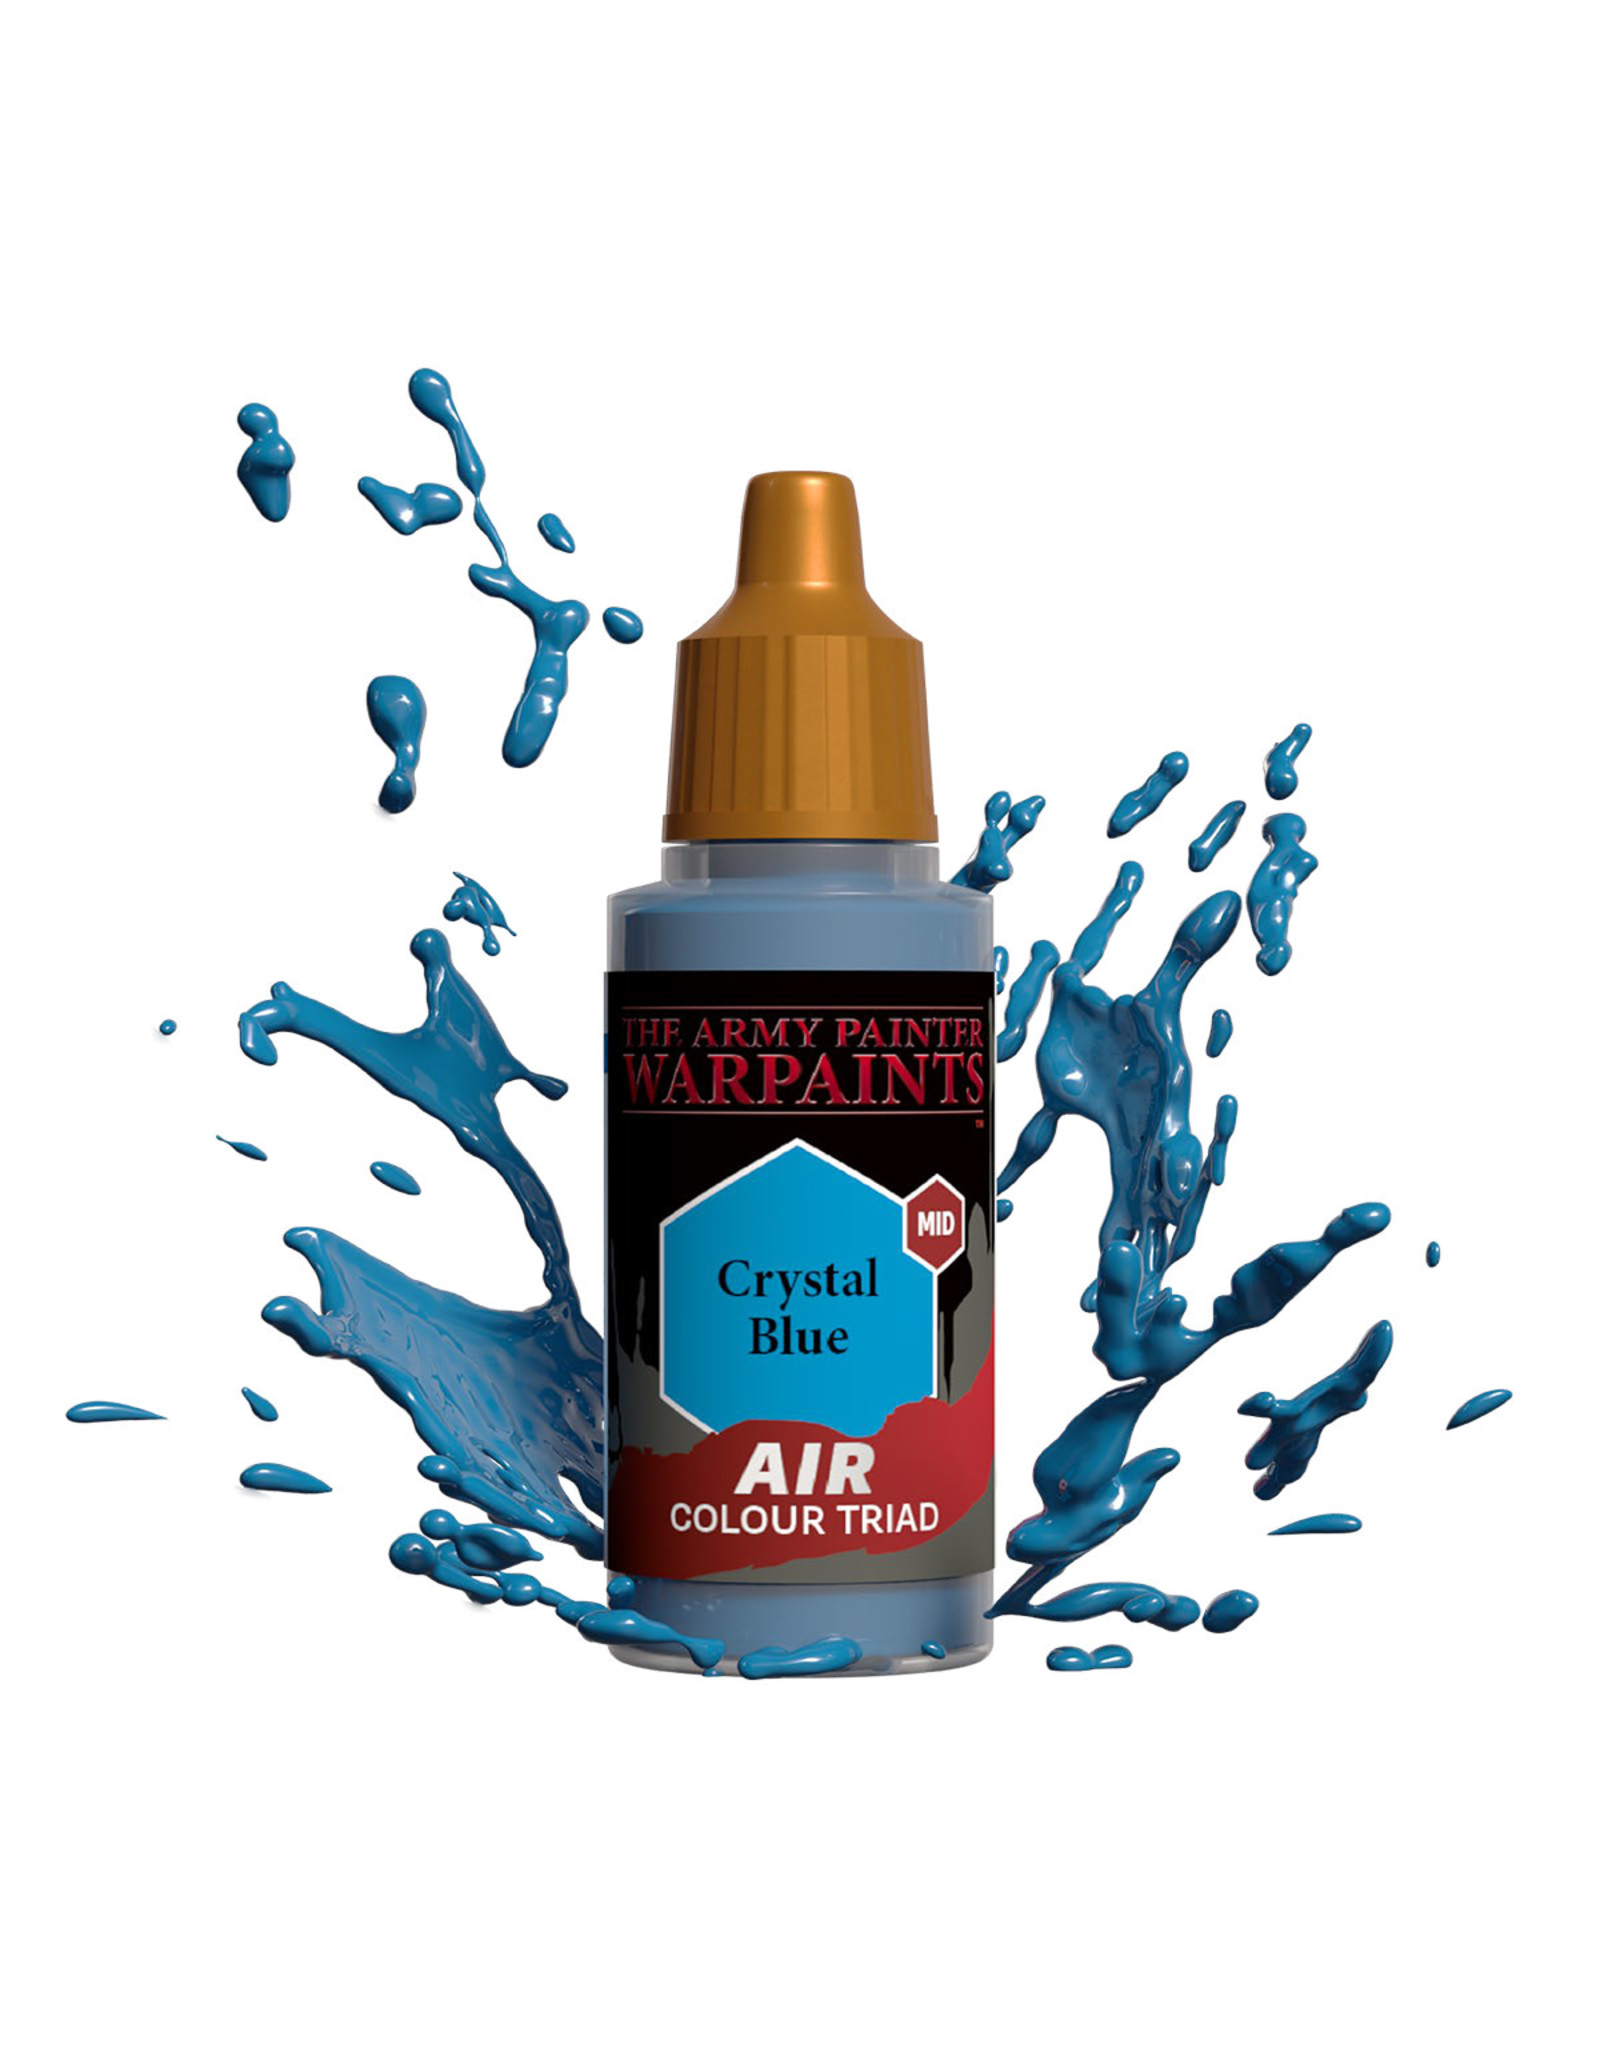 The Army Painter The Army Painter Warpaints Air: Crystal Blue